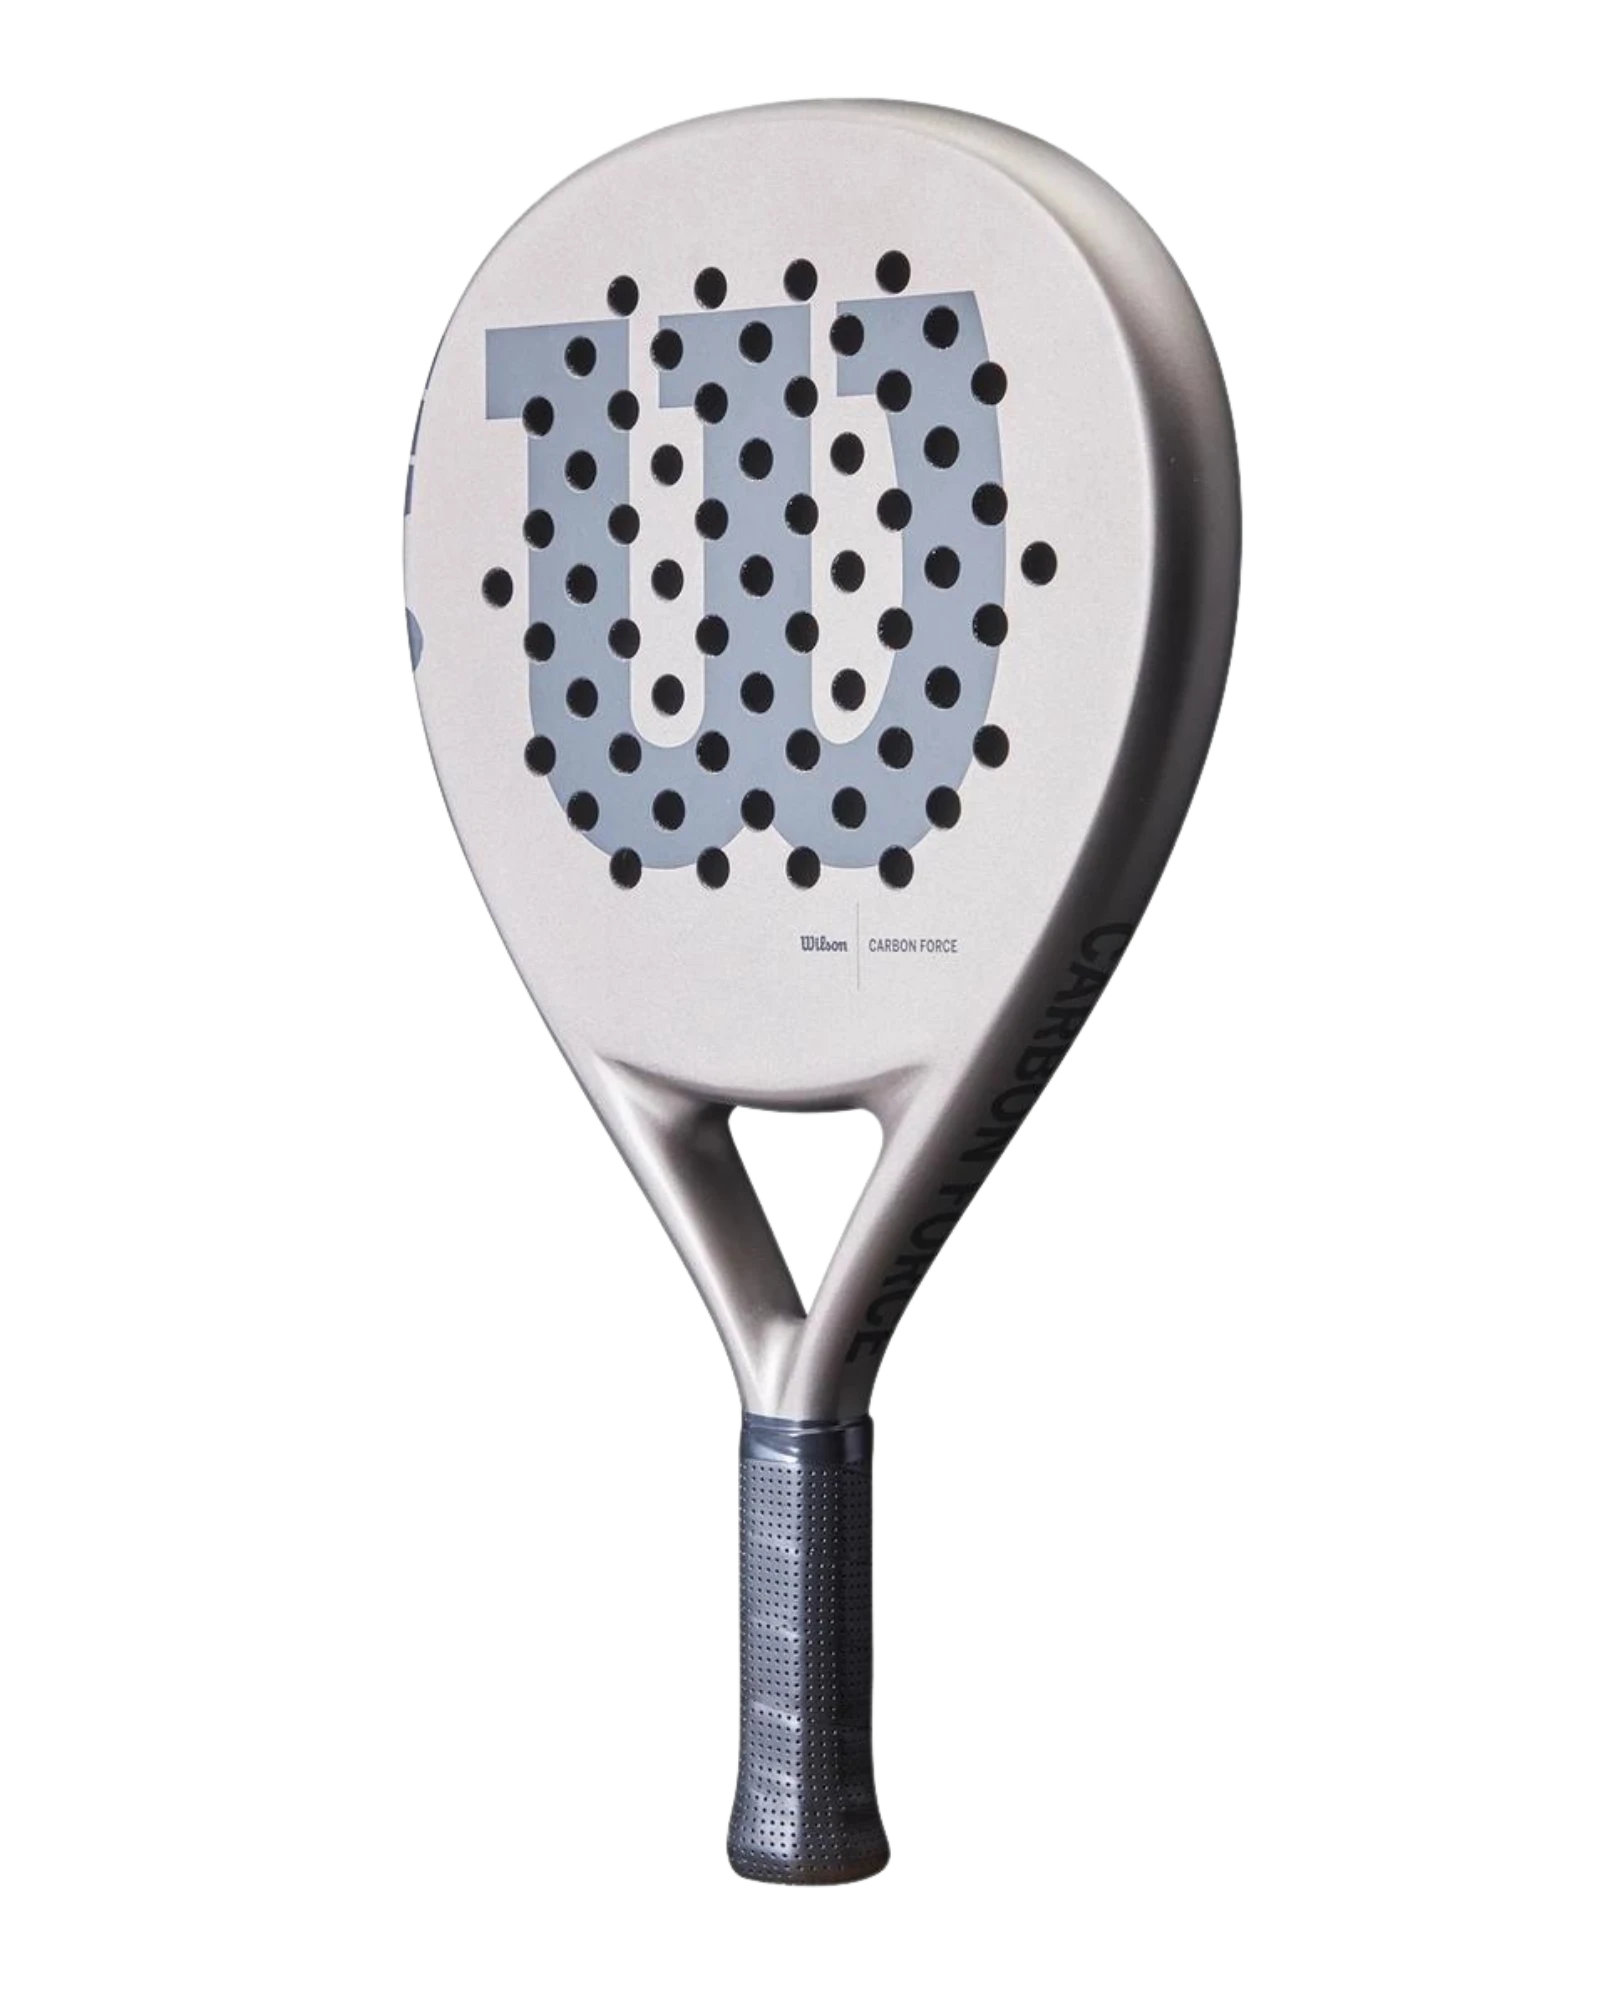 The Wilson Carbon Force 2024 Padel Racket